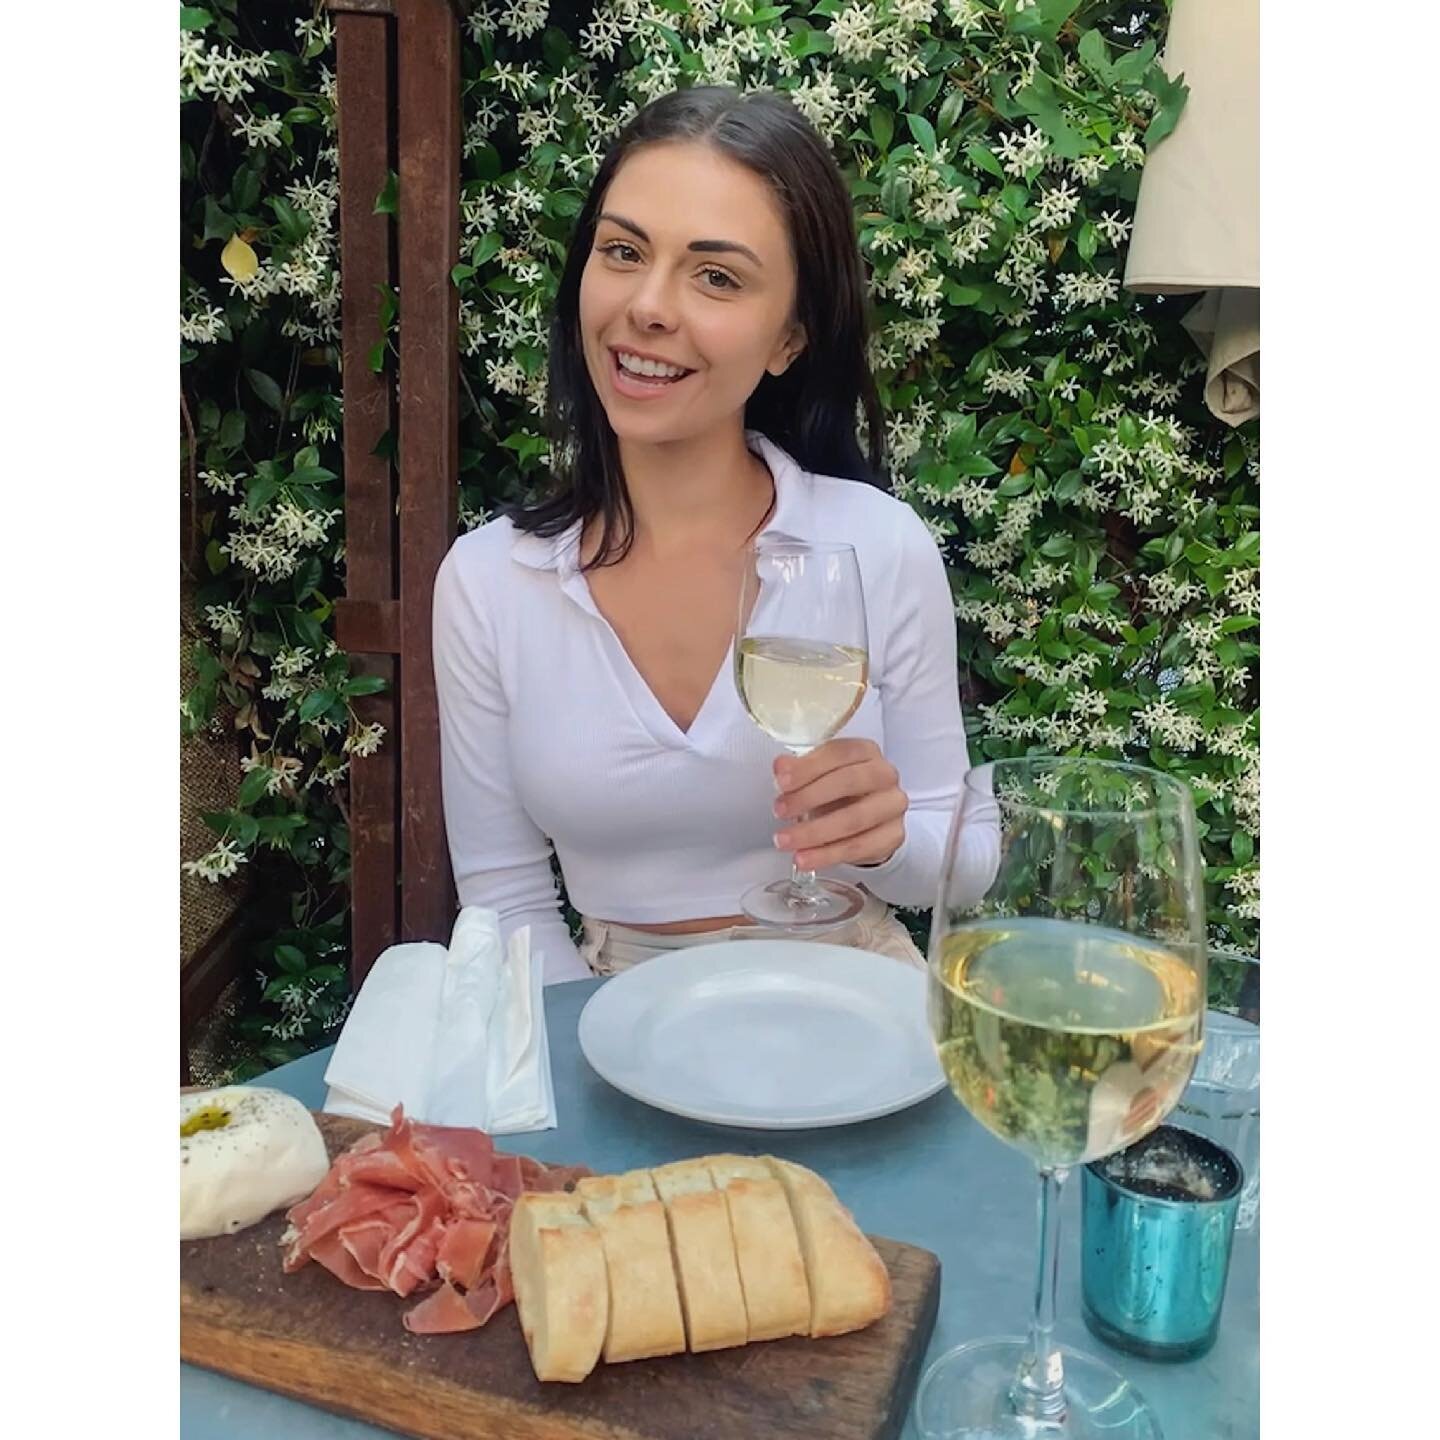 Me acting cool, calm &amp; collected when the waiter drops off the charcuterie board vs my actual reaction when he leaves me alone with the burrata 😌